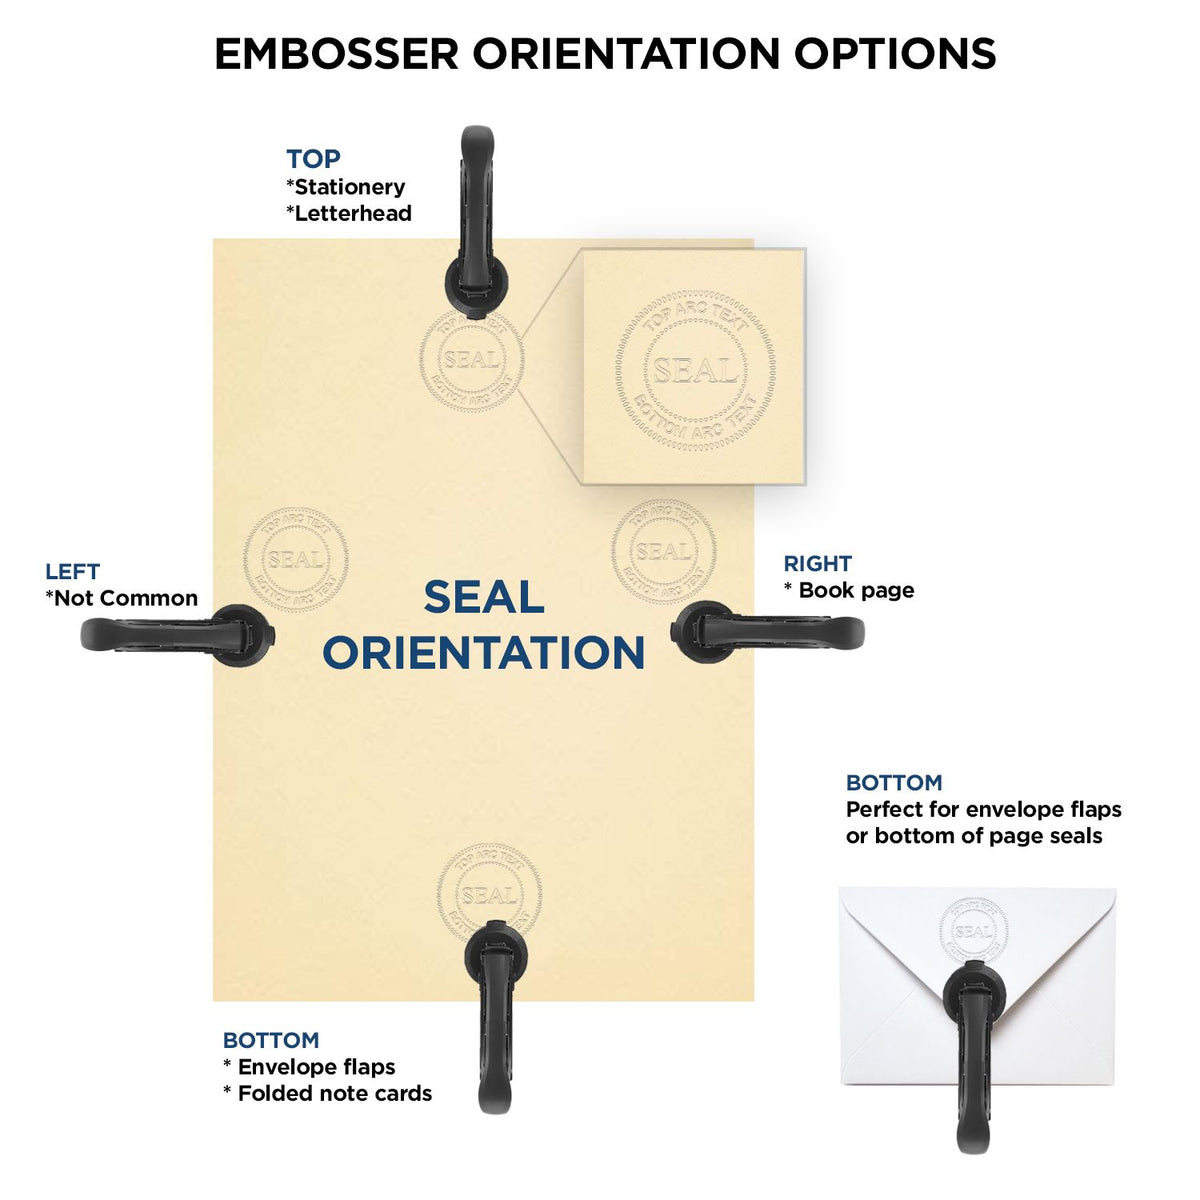 An infographic for the Soft Pocket Missouri Landscape Architect Embosser showing embosser orientation, this is showing examples of a top, bottom, right and left insert.